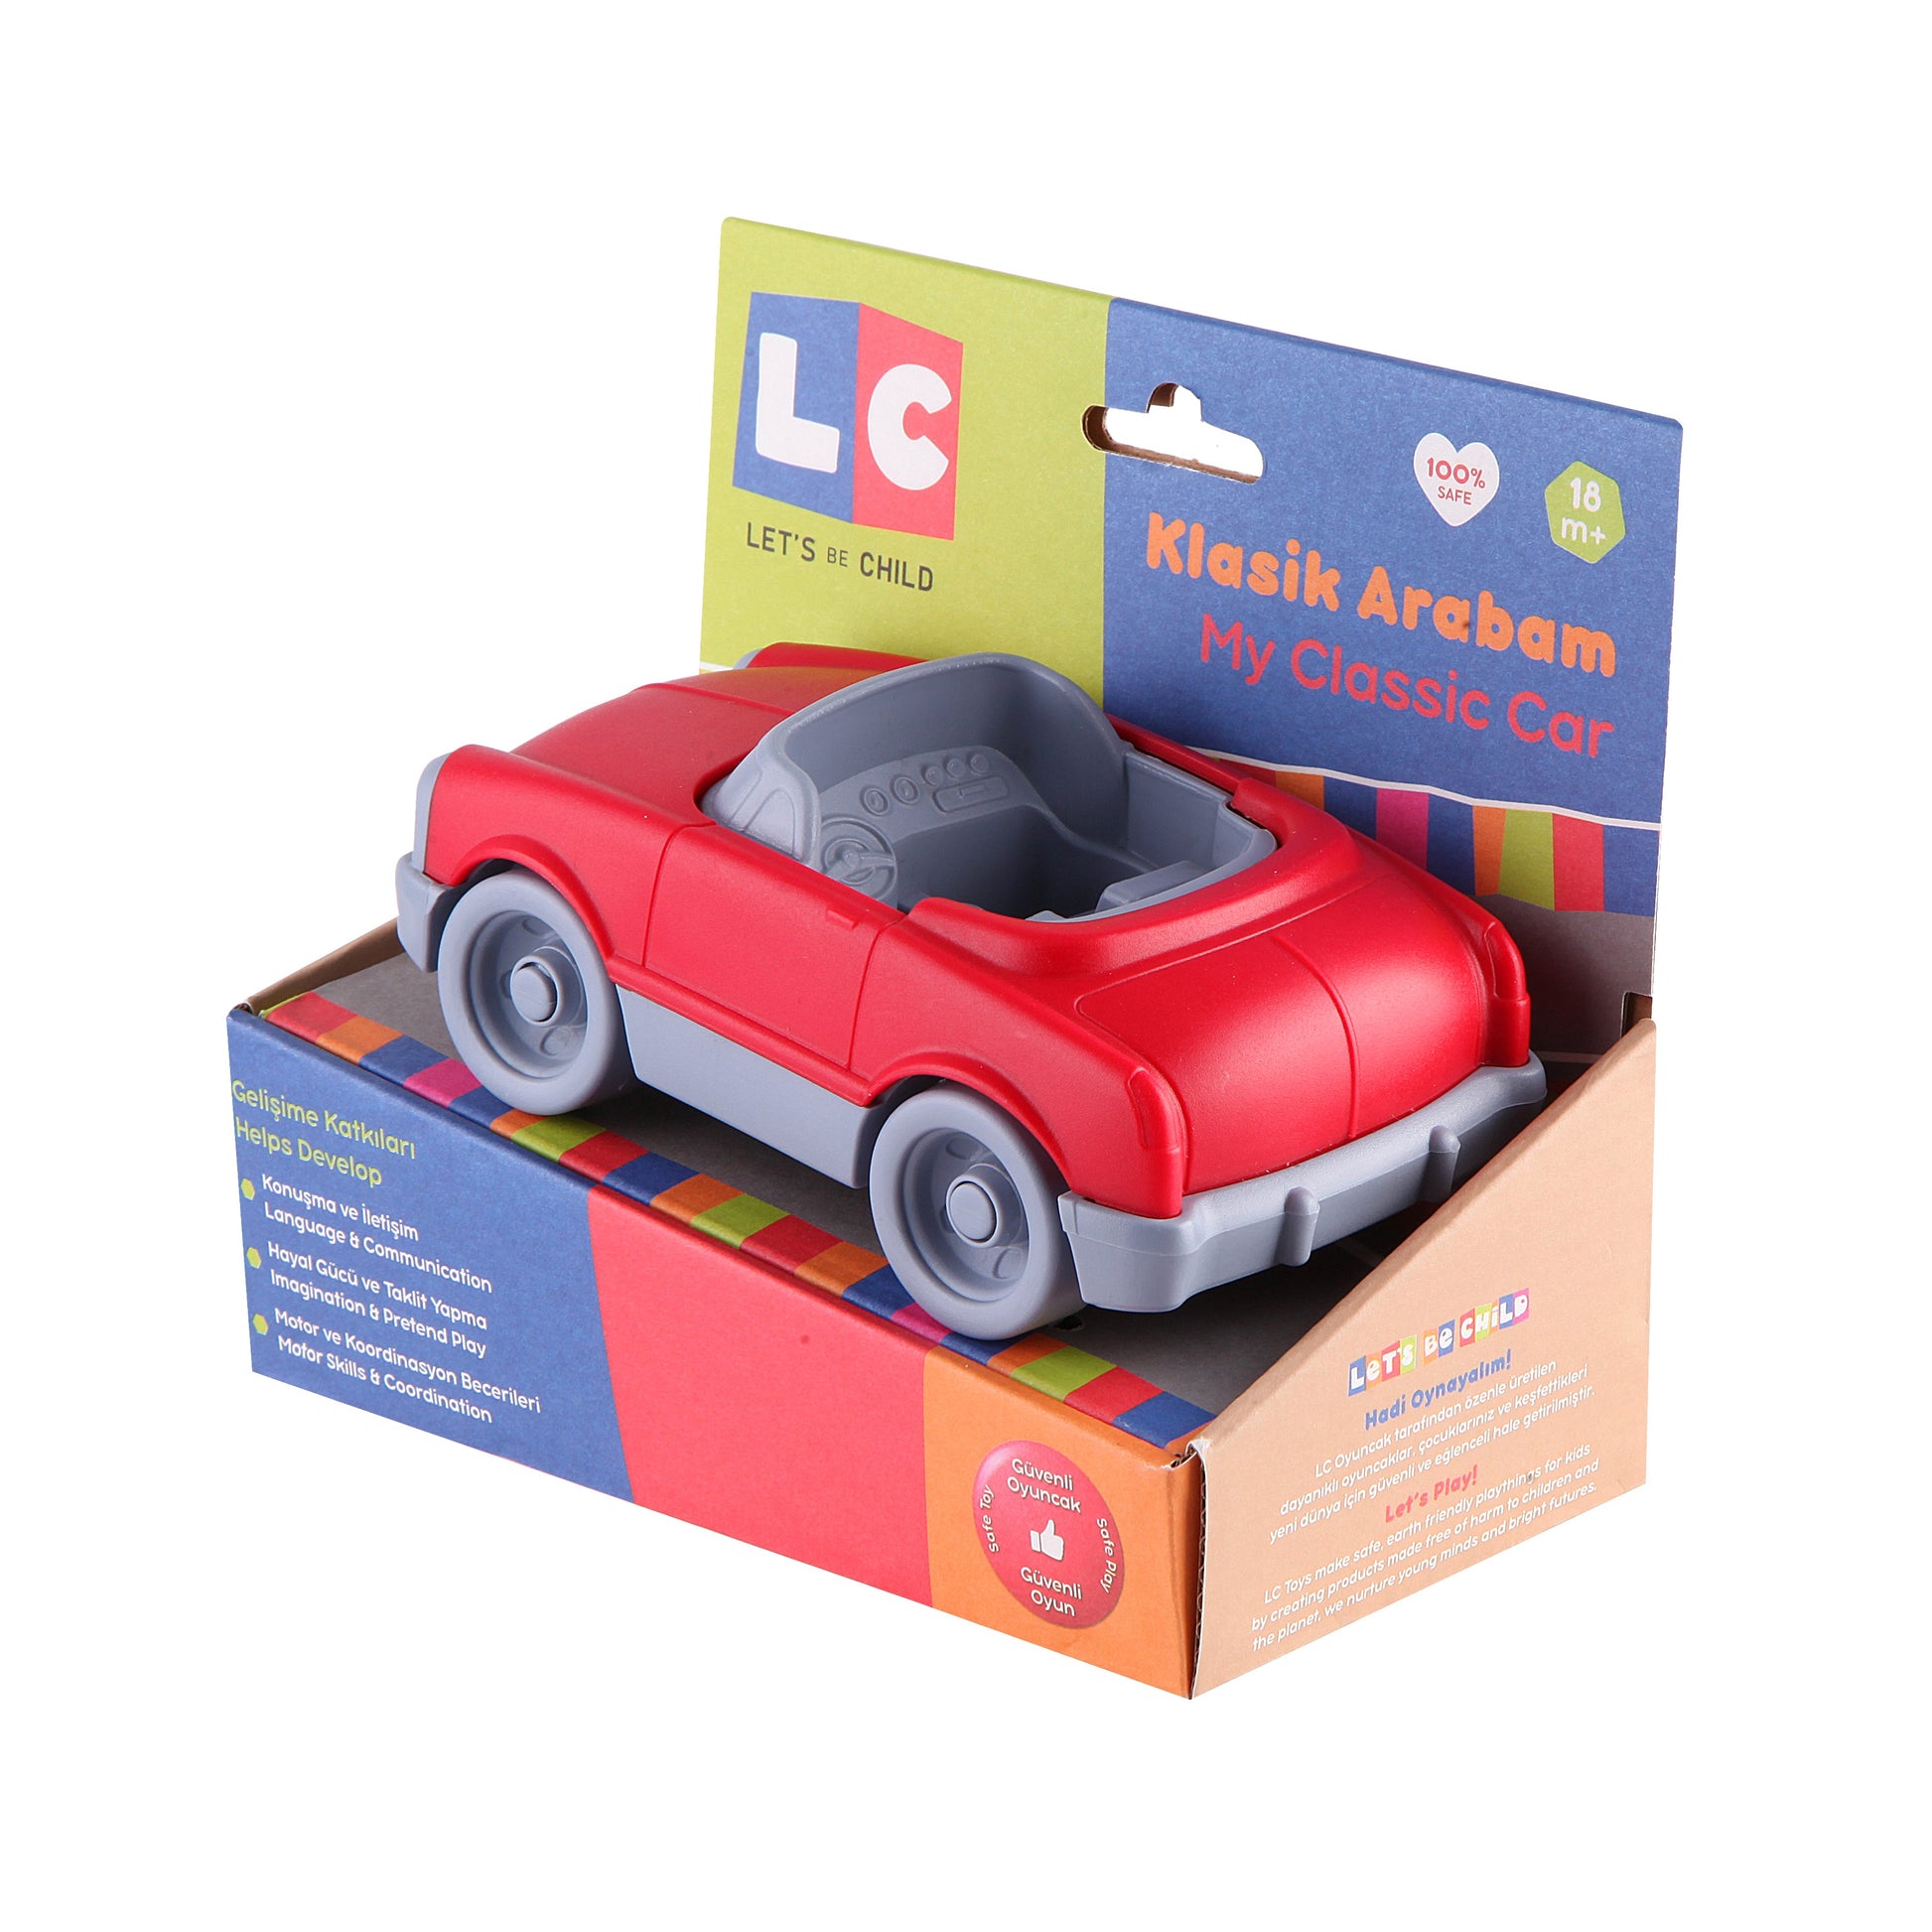 Red Classic Car-Car, catveh, Classic, Communication, Coordination, Imagination, Language, Motor, Pretend, Red, Skills, Toy, Wheels-Let's Be Child-[Too Twee]-[Tootwee]-[baby]-[newborn]-[clothes]-[essentials]-[toys]-[Lebanon]